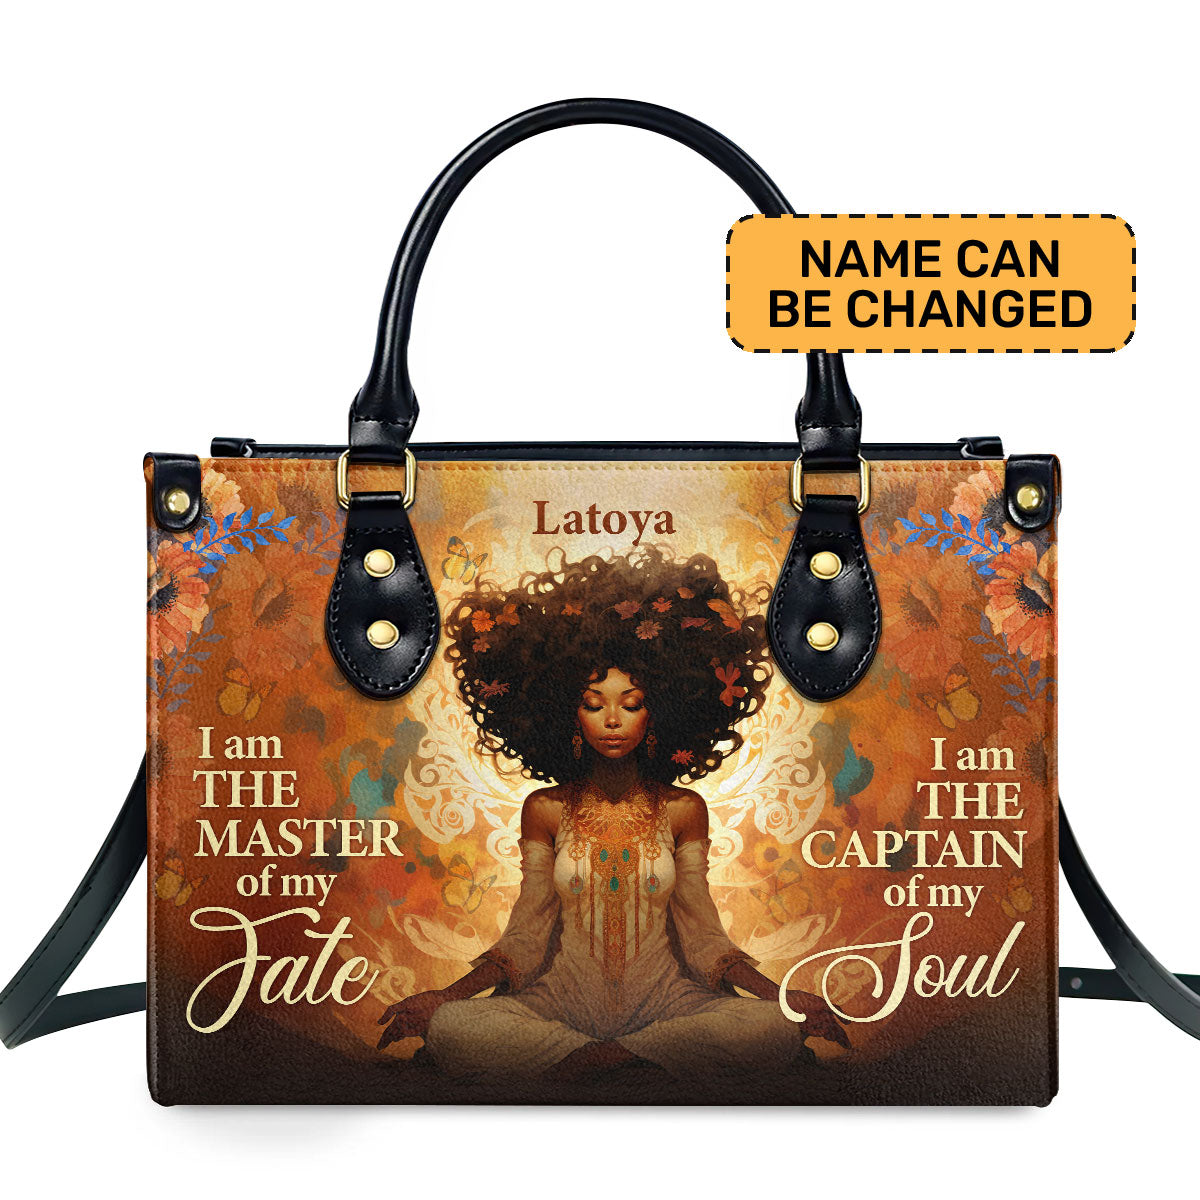 I Am The Master Of My Fate - Personalized Leather Handbag STB56